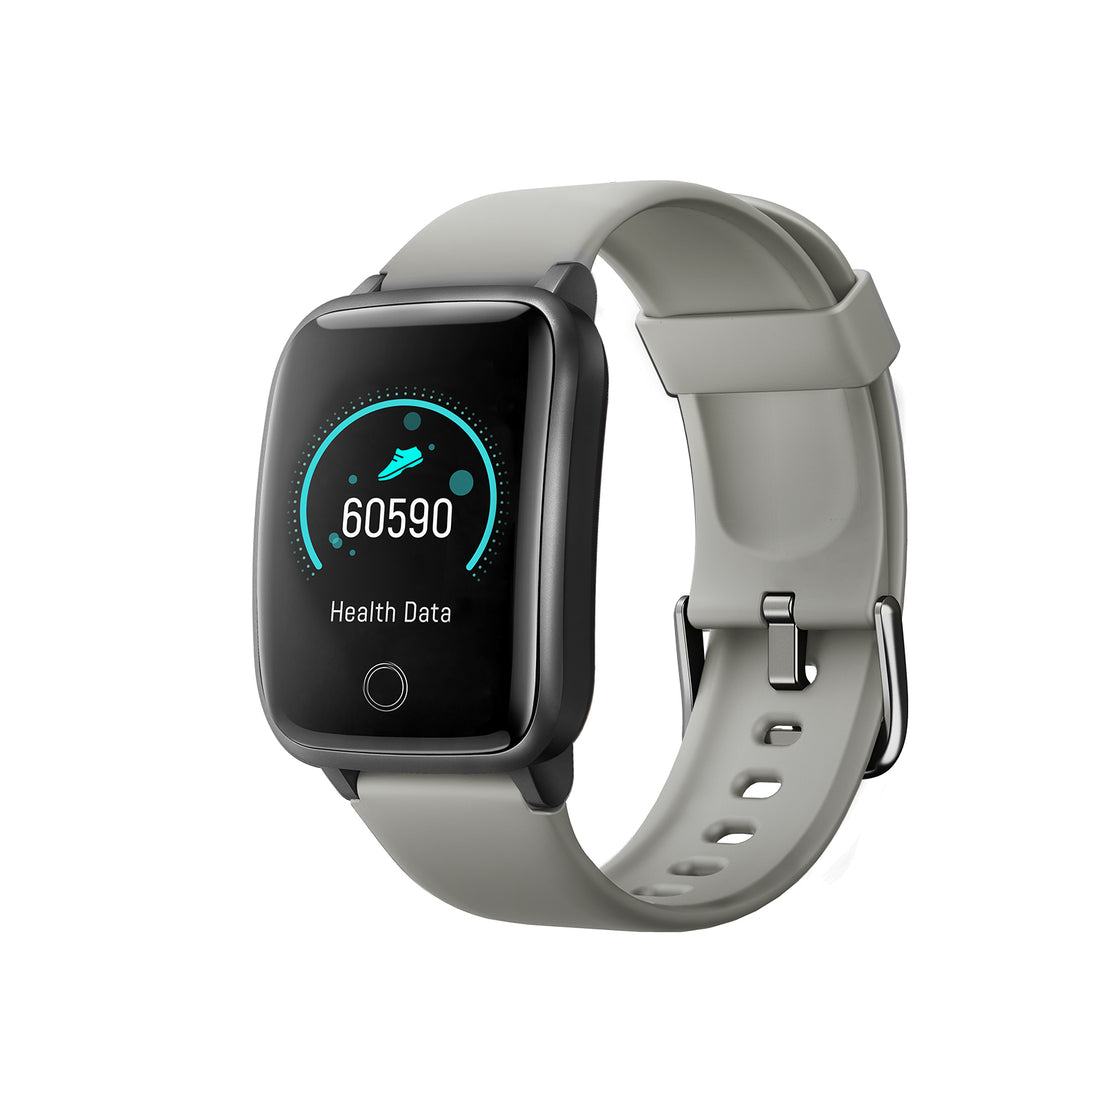 Smart Watch Bluetooth Heart Rate Monitor Waterproof LCD Touch Screen - Silver Grey